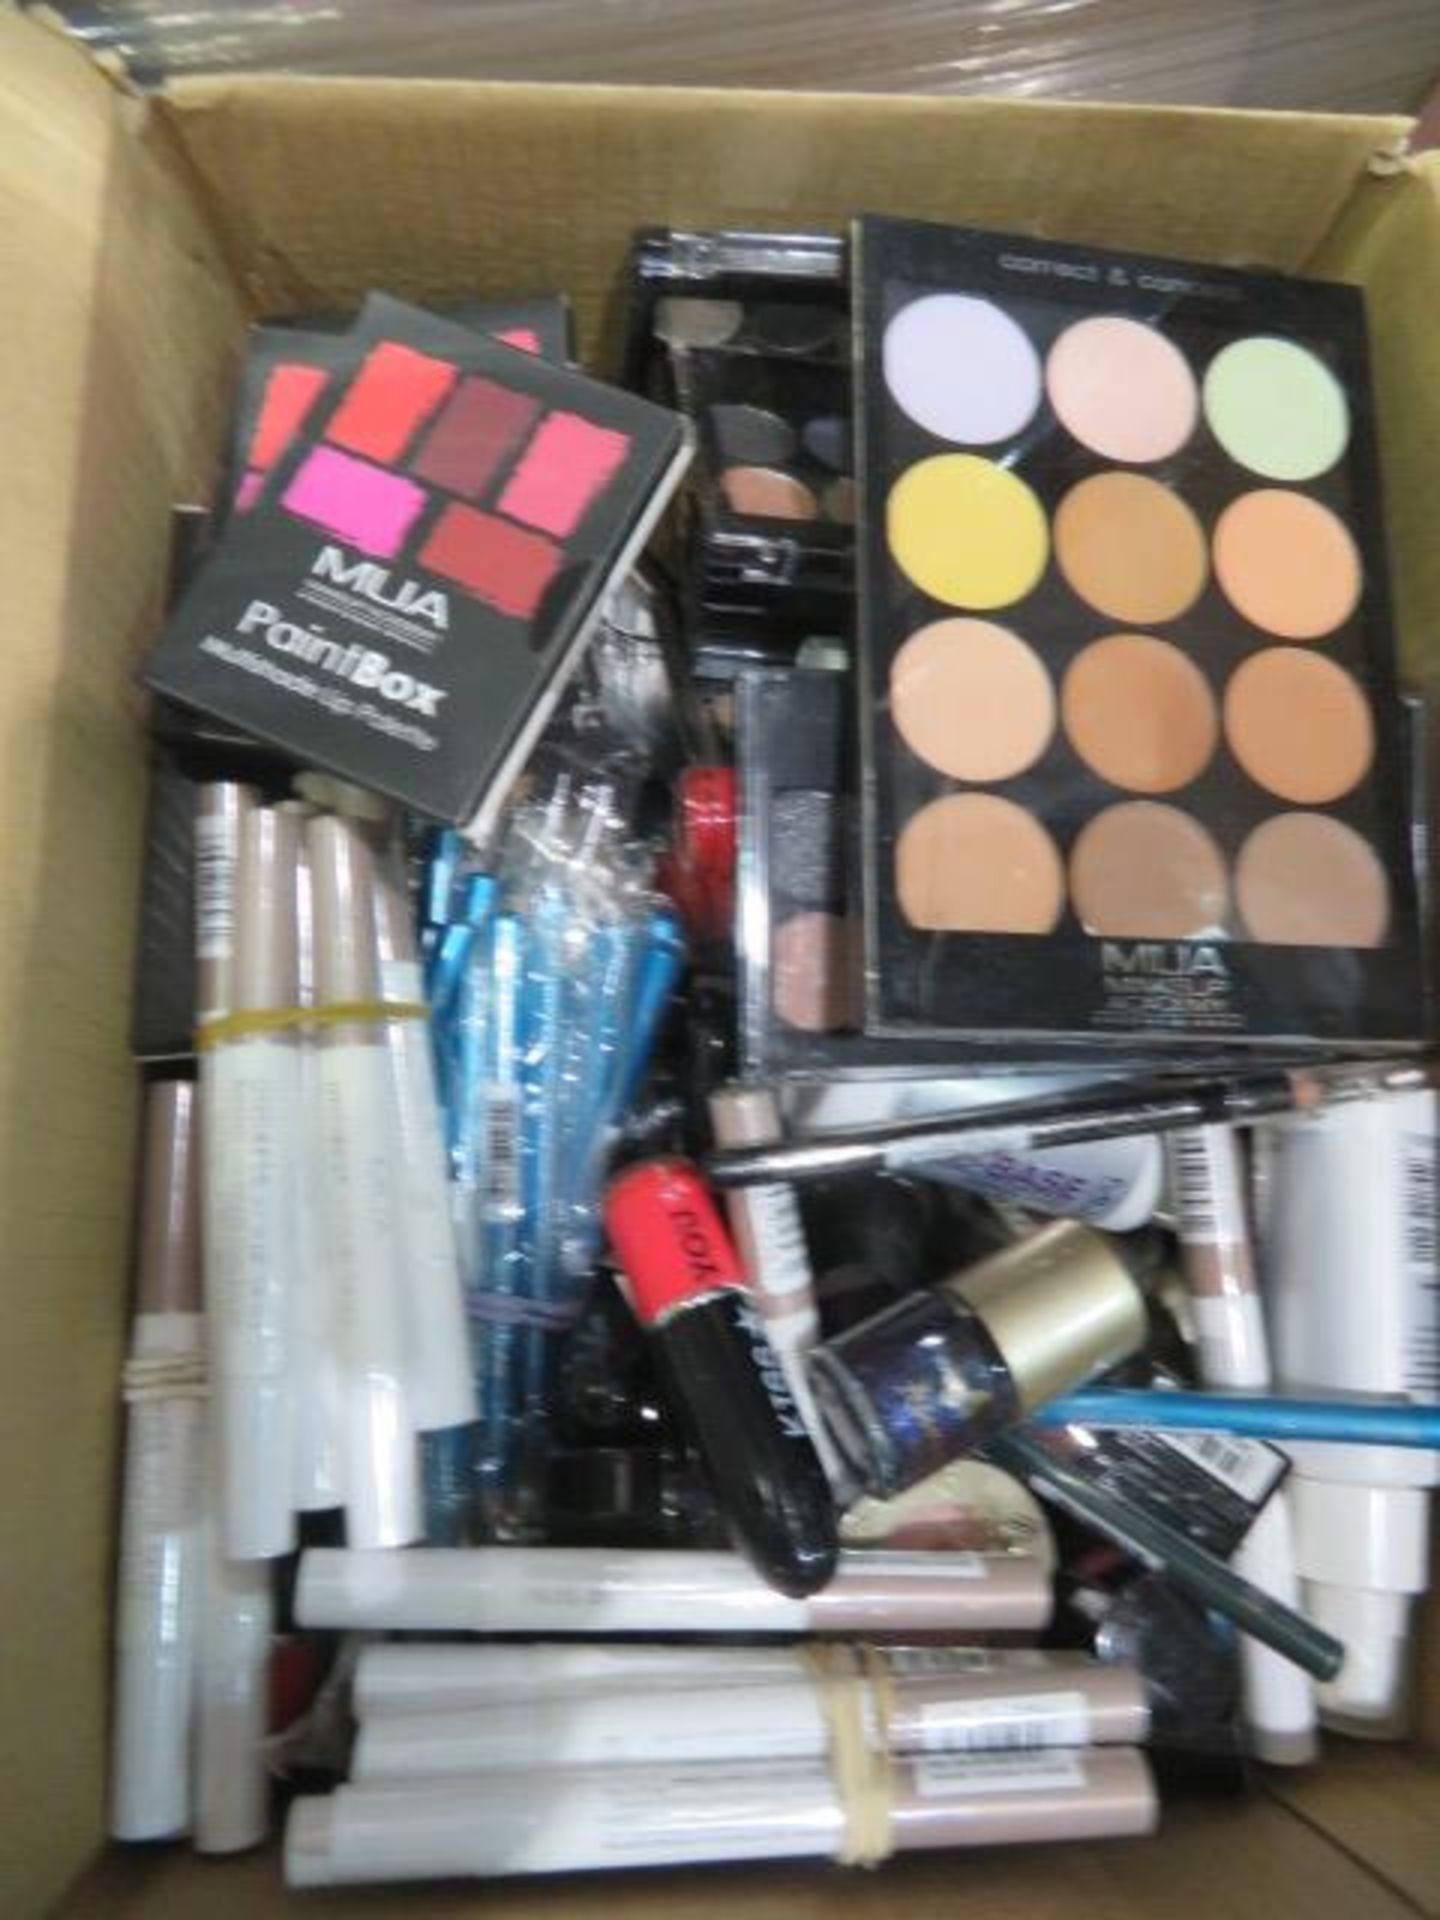 Circa. 200 items of various new make up acadamy make up to include: paintbox multishade lip